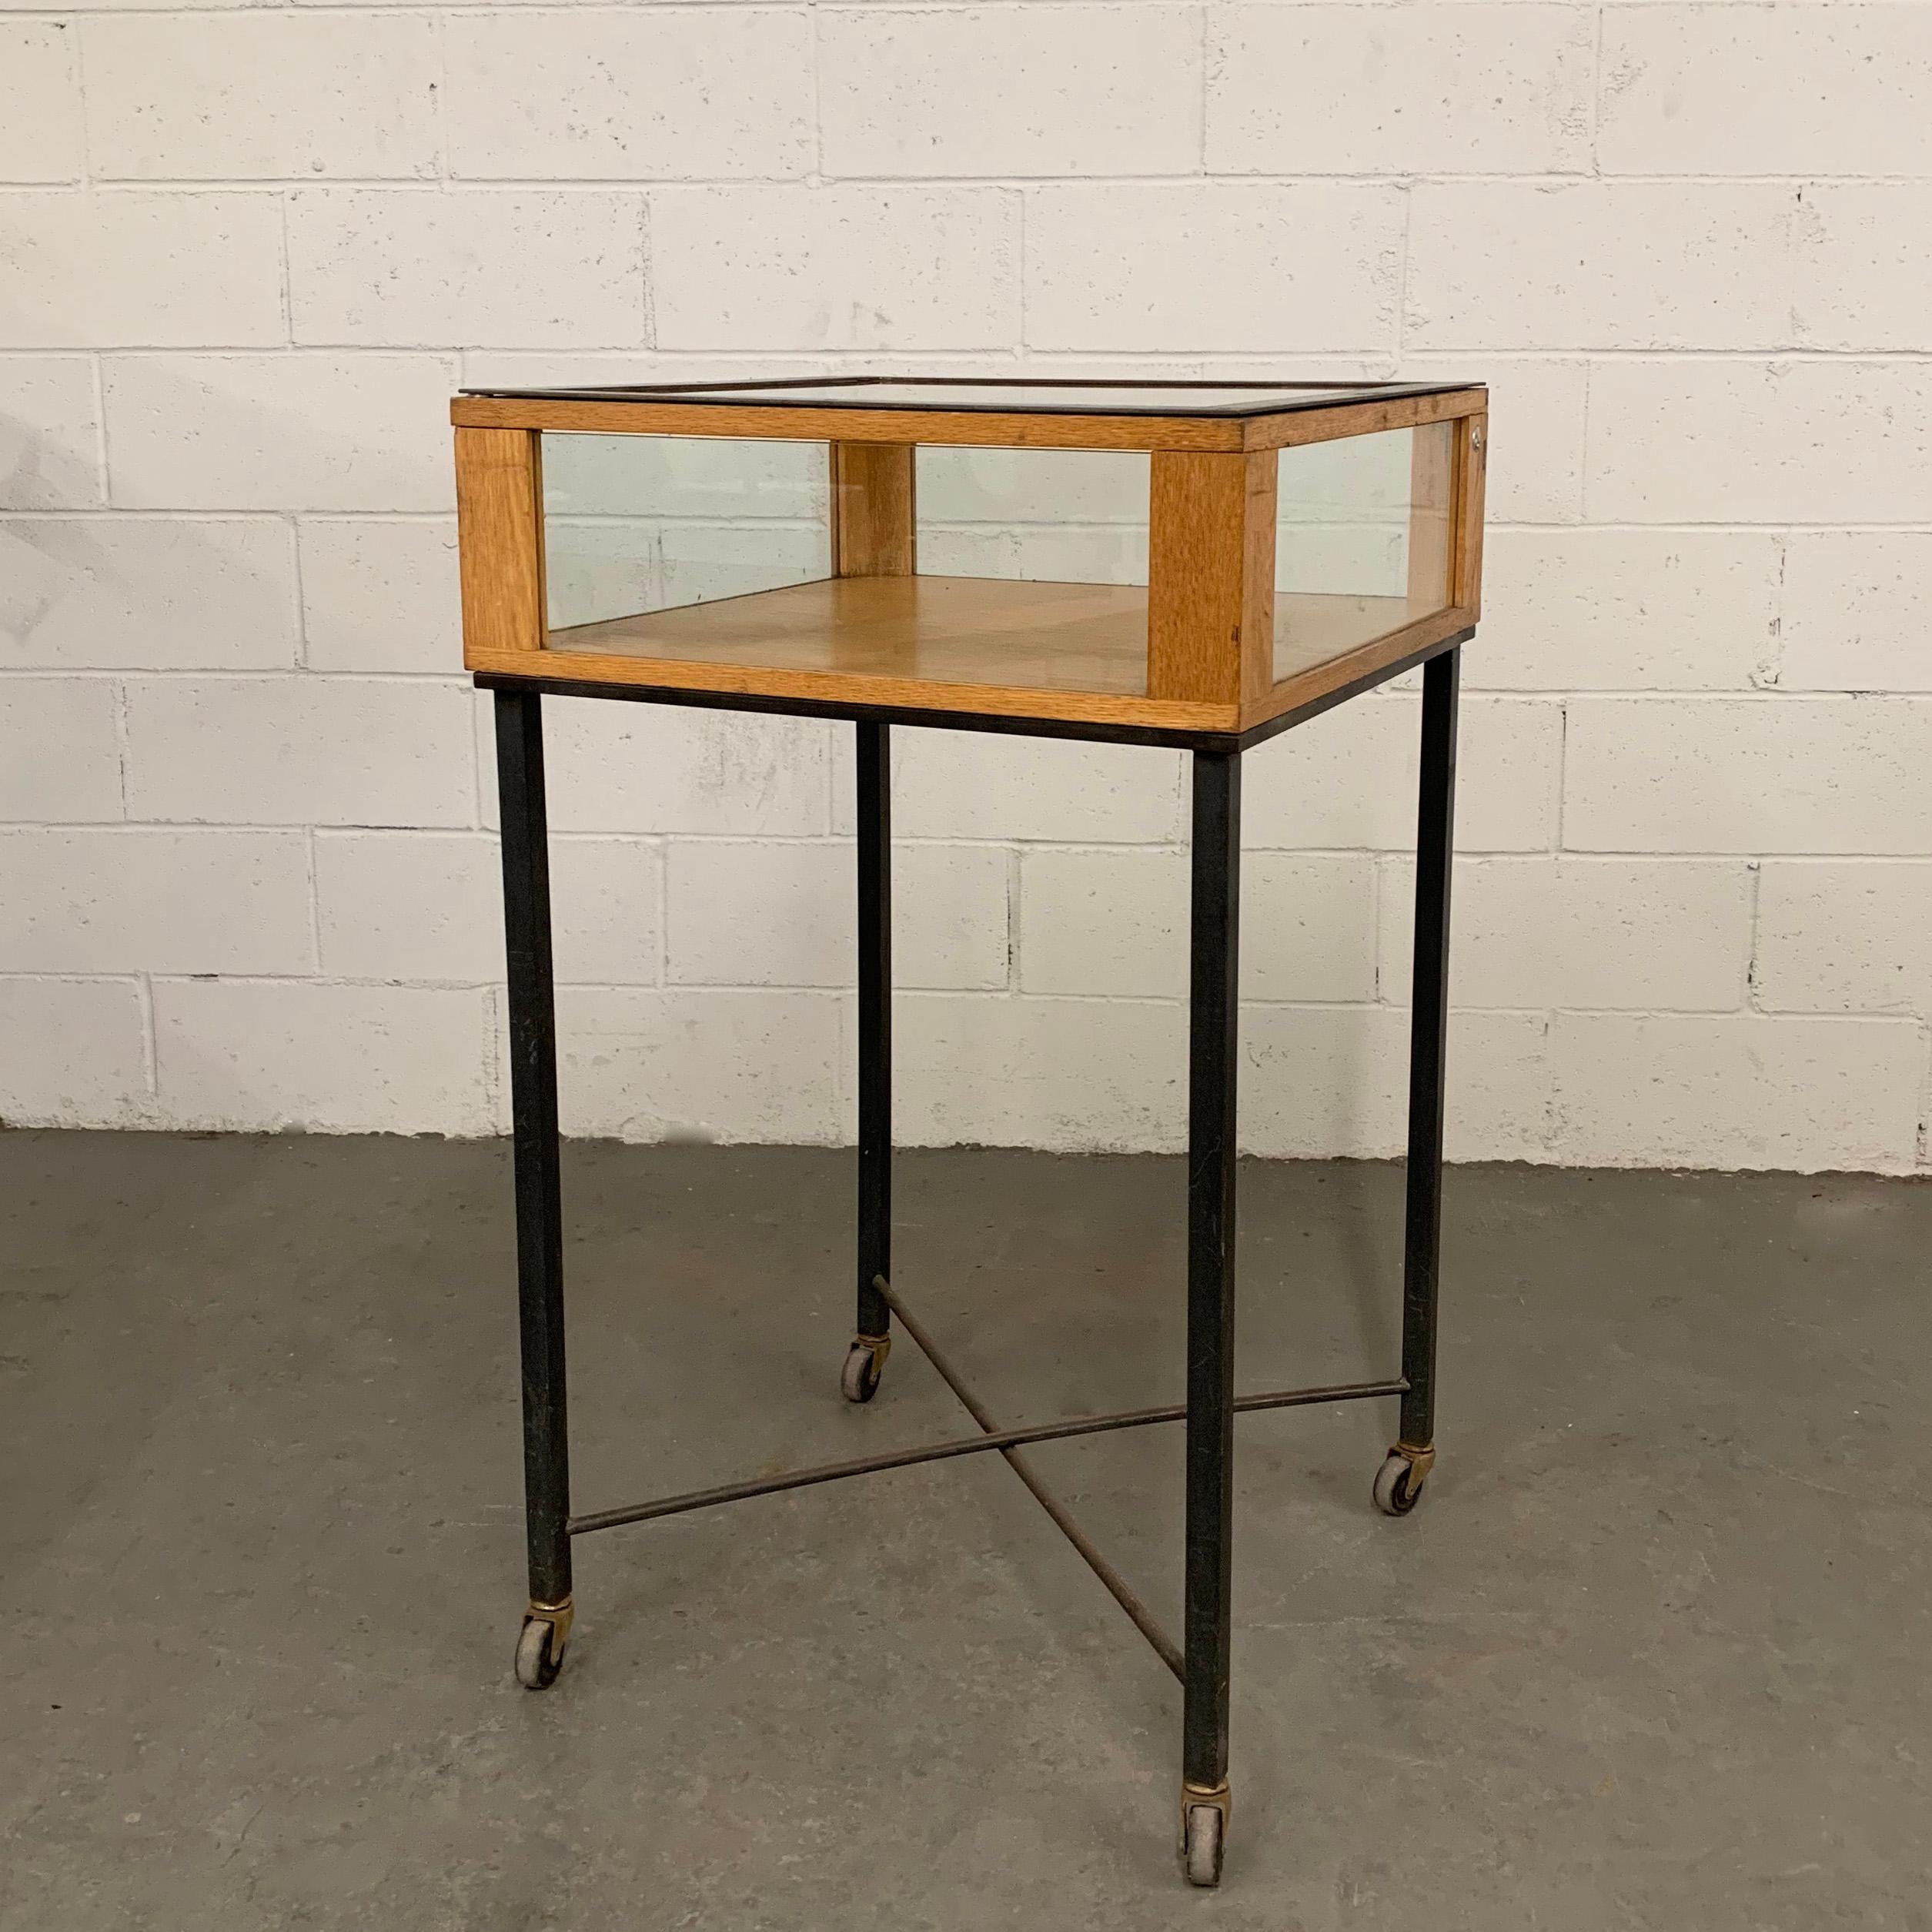 Industrial, jewelry display case features a 9 inch height, oak and glass display cabinet with steel frame on a rolling iron base. The case opens from the top.